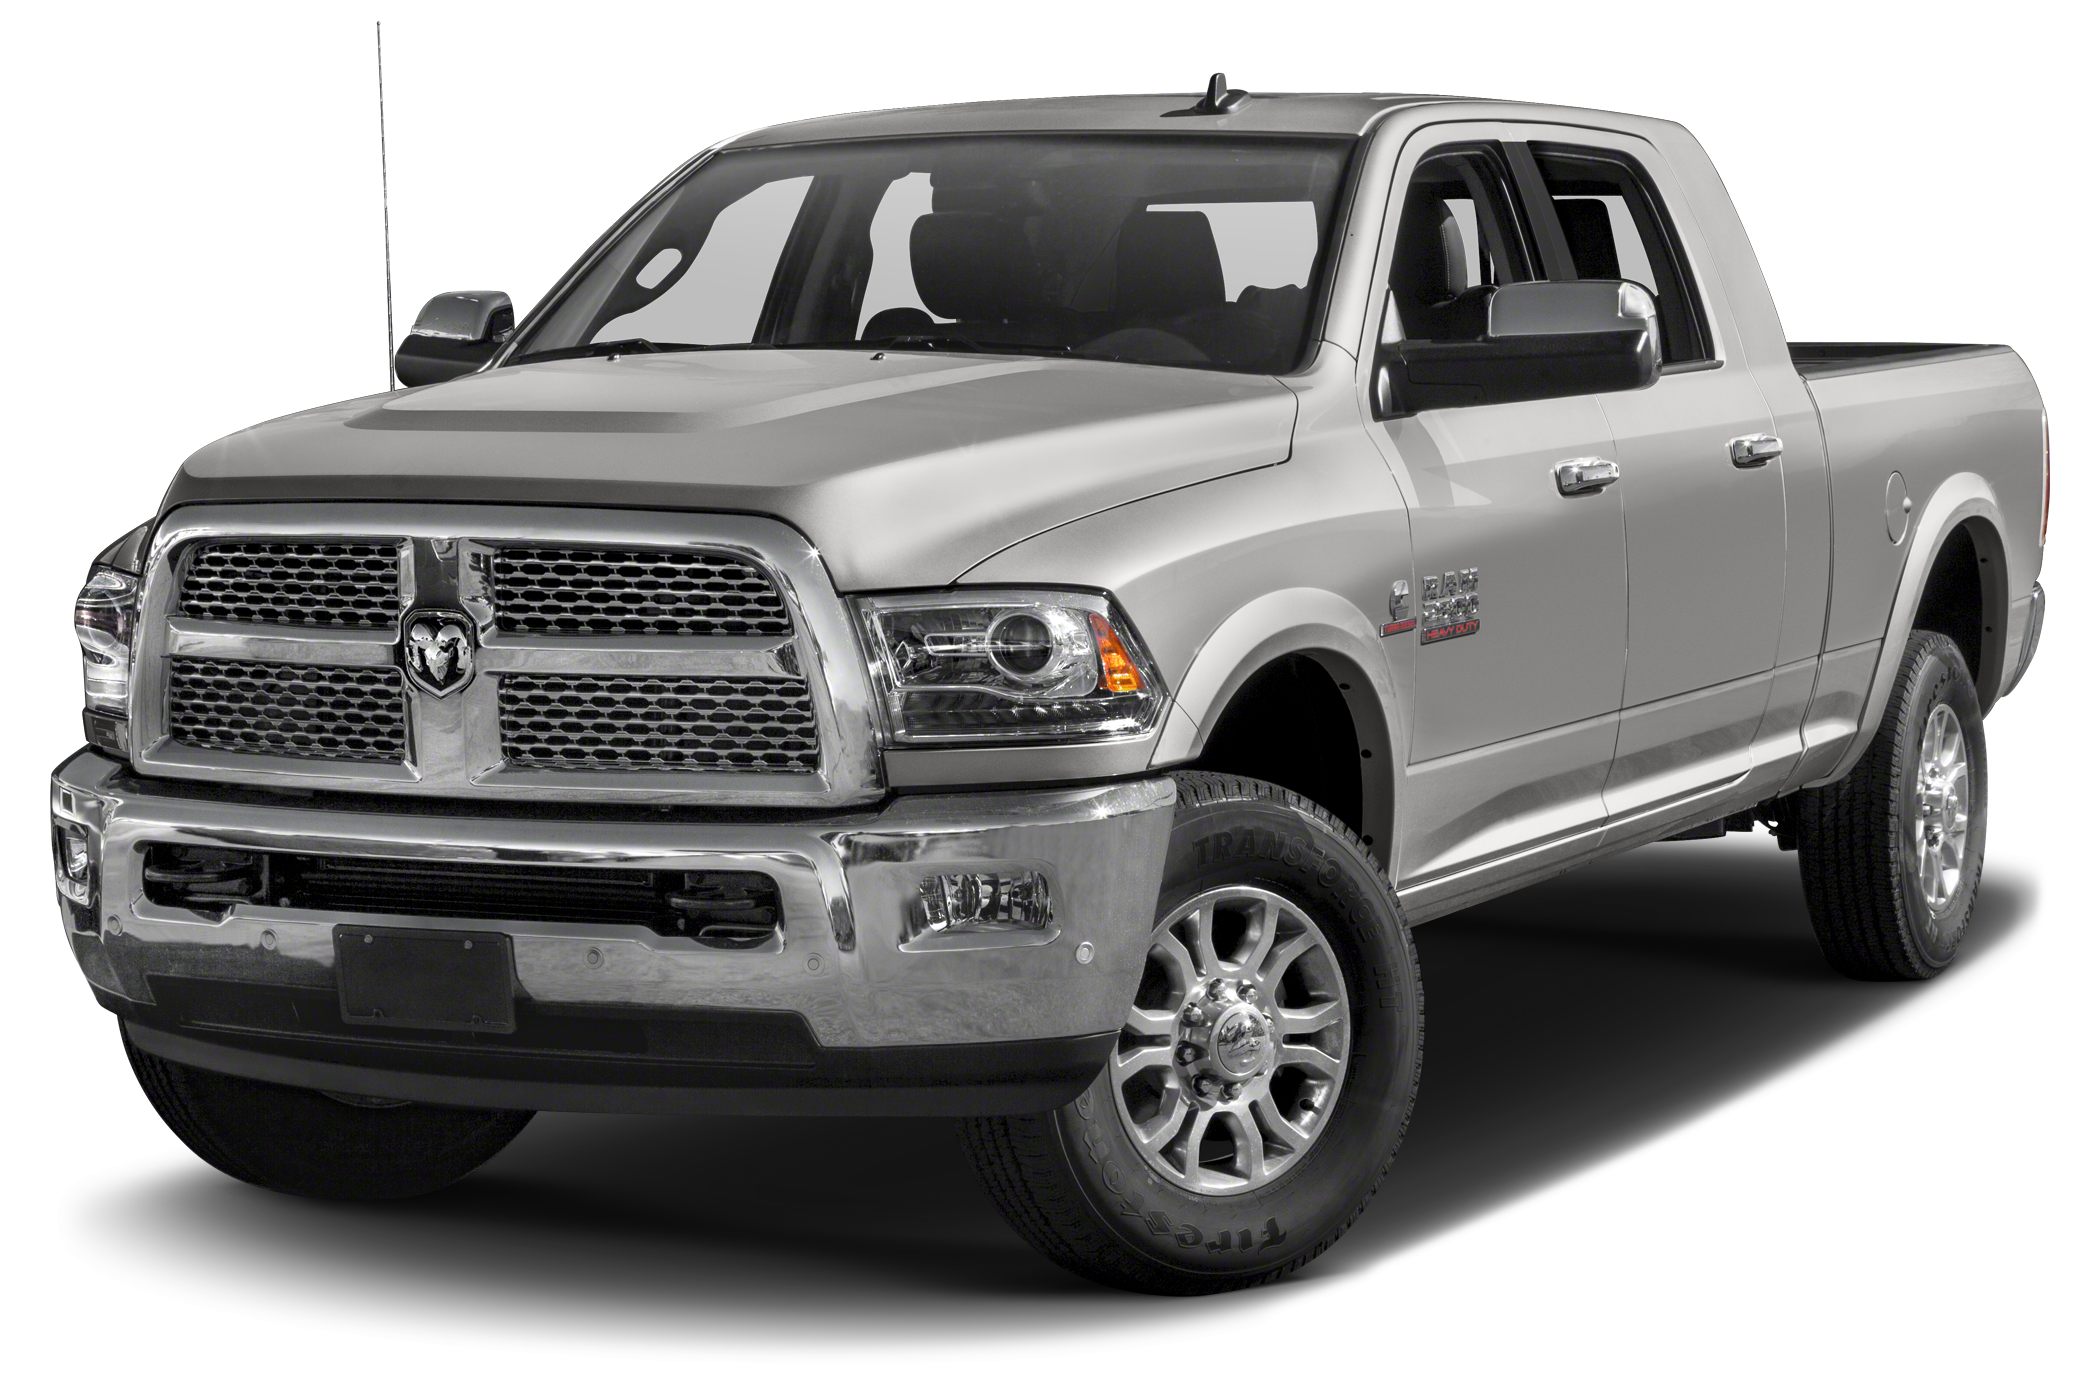 Great Deals on a new 2018 RAM 2500 Laramie 4x4 Mega Cab 160.5 in. WB at ...